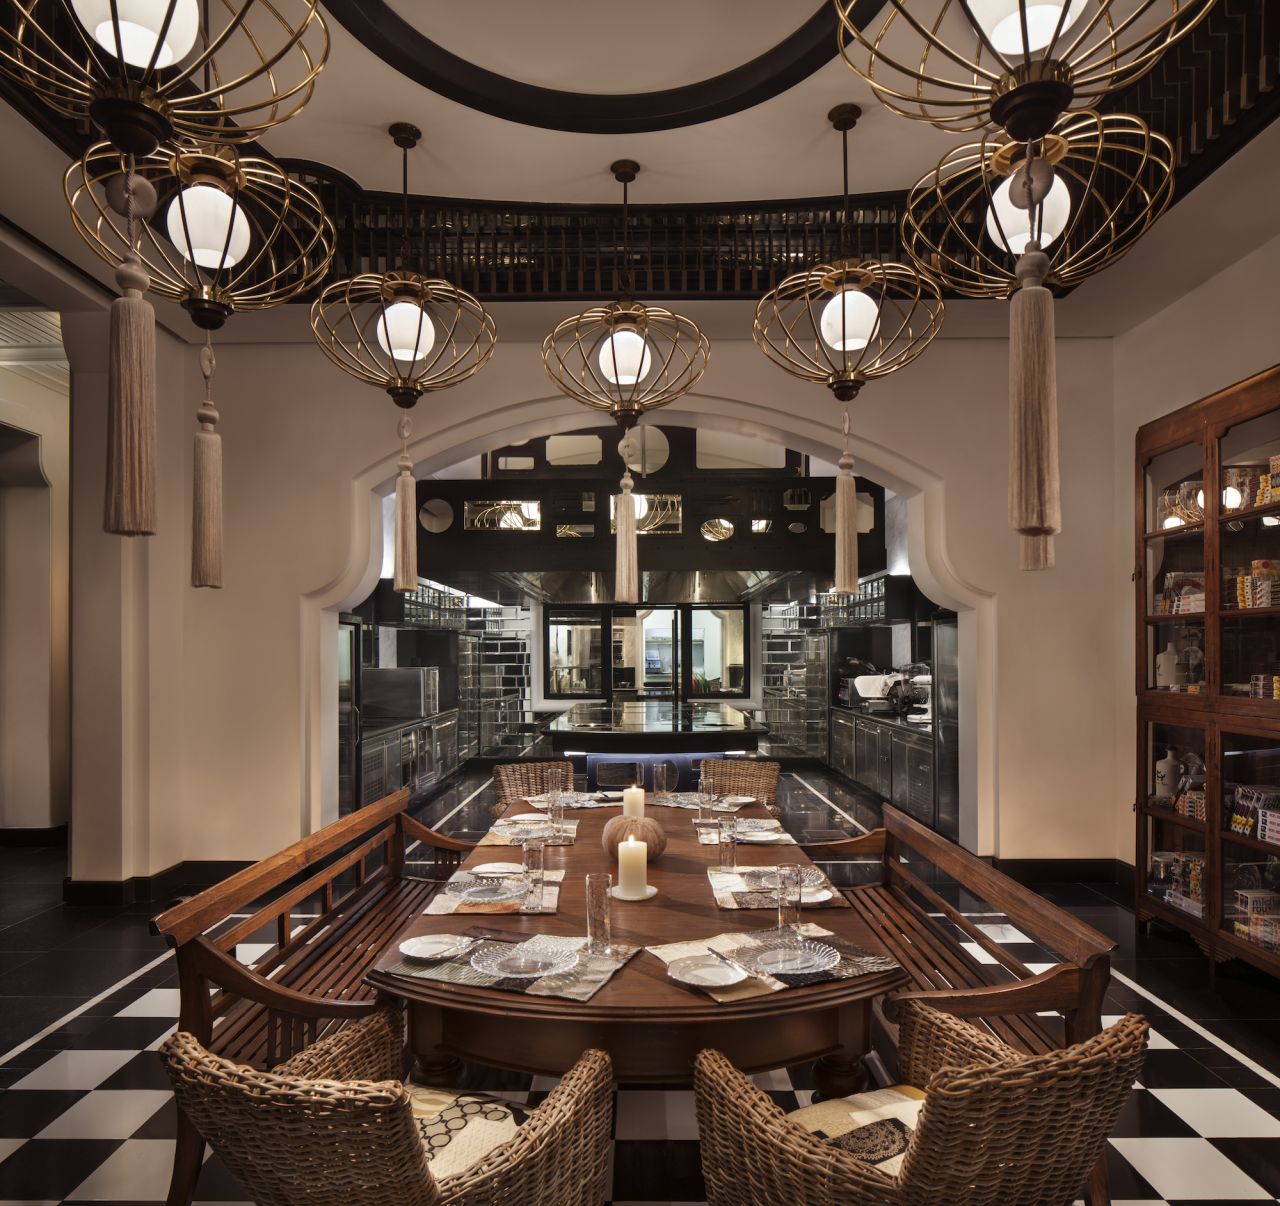 Legendary French chef Pierre Gagnaire took over the InterContinental Danang Peninsula Resort's Maison 1888 restaurant last year. It serves classical French cuisine with contemporary flair that integrates global and local ingredients.